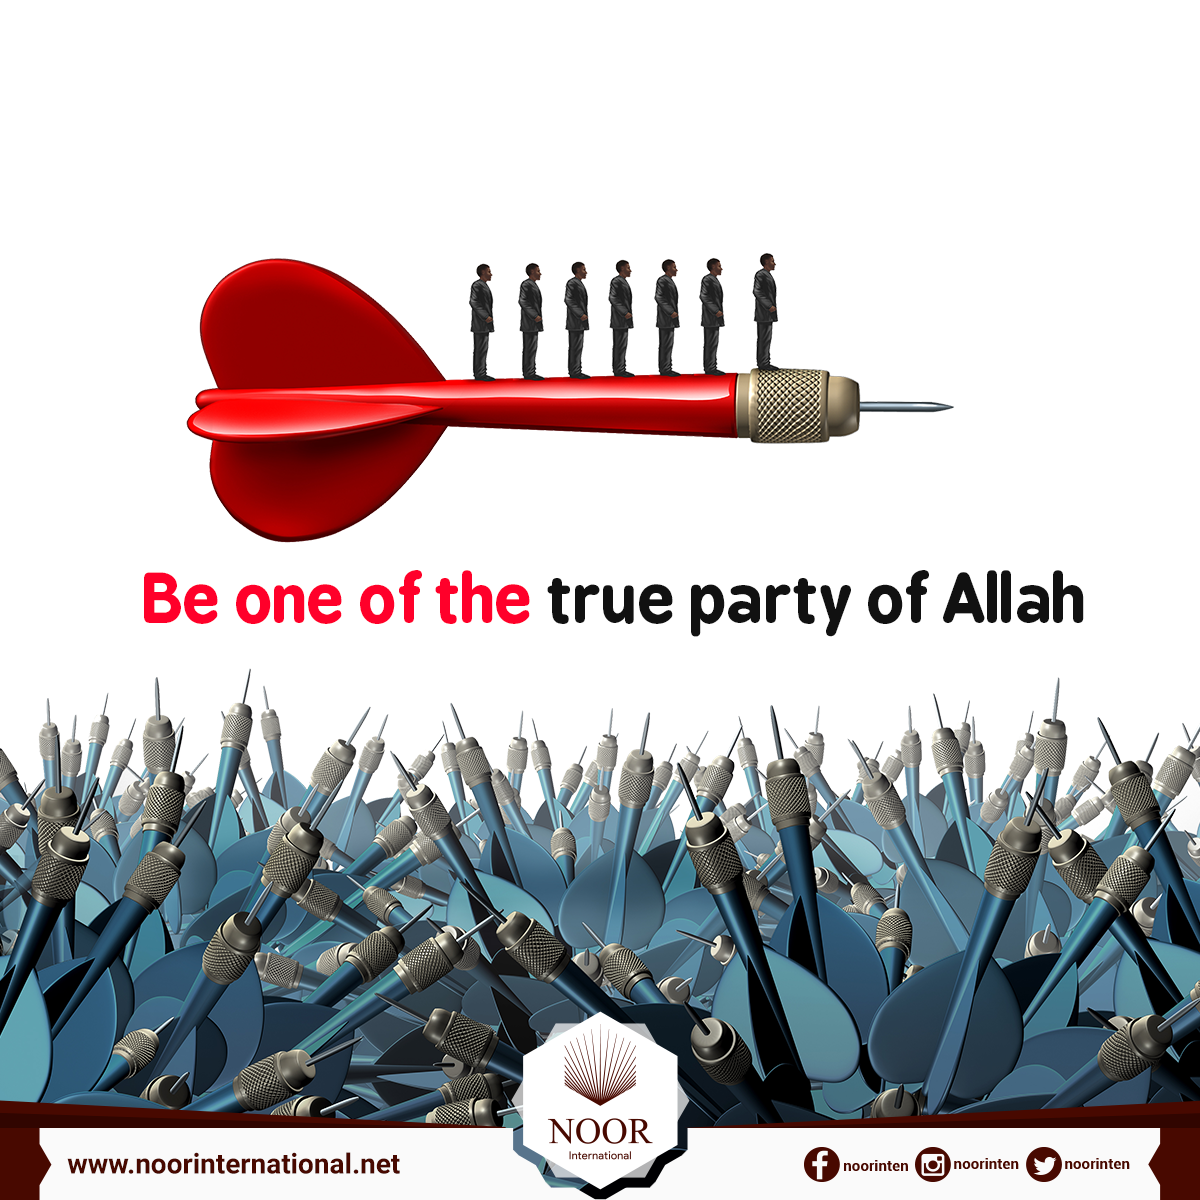 Be one of the true party of Allah